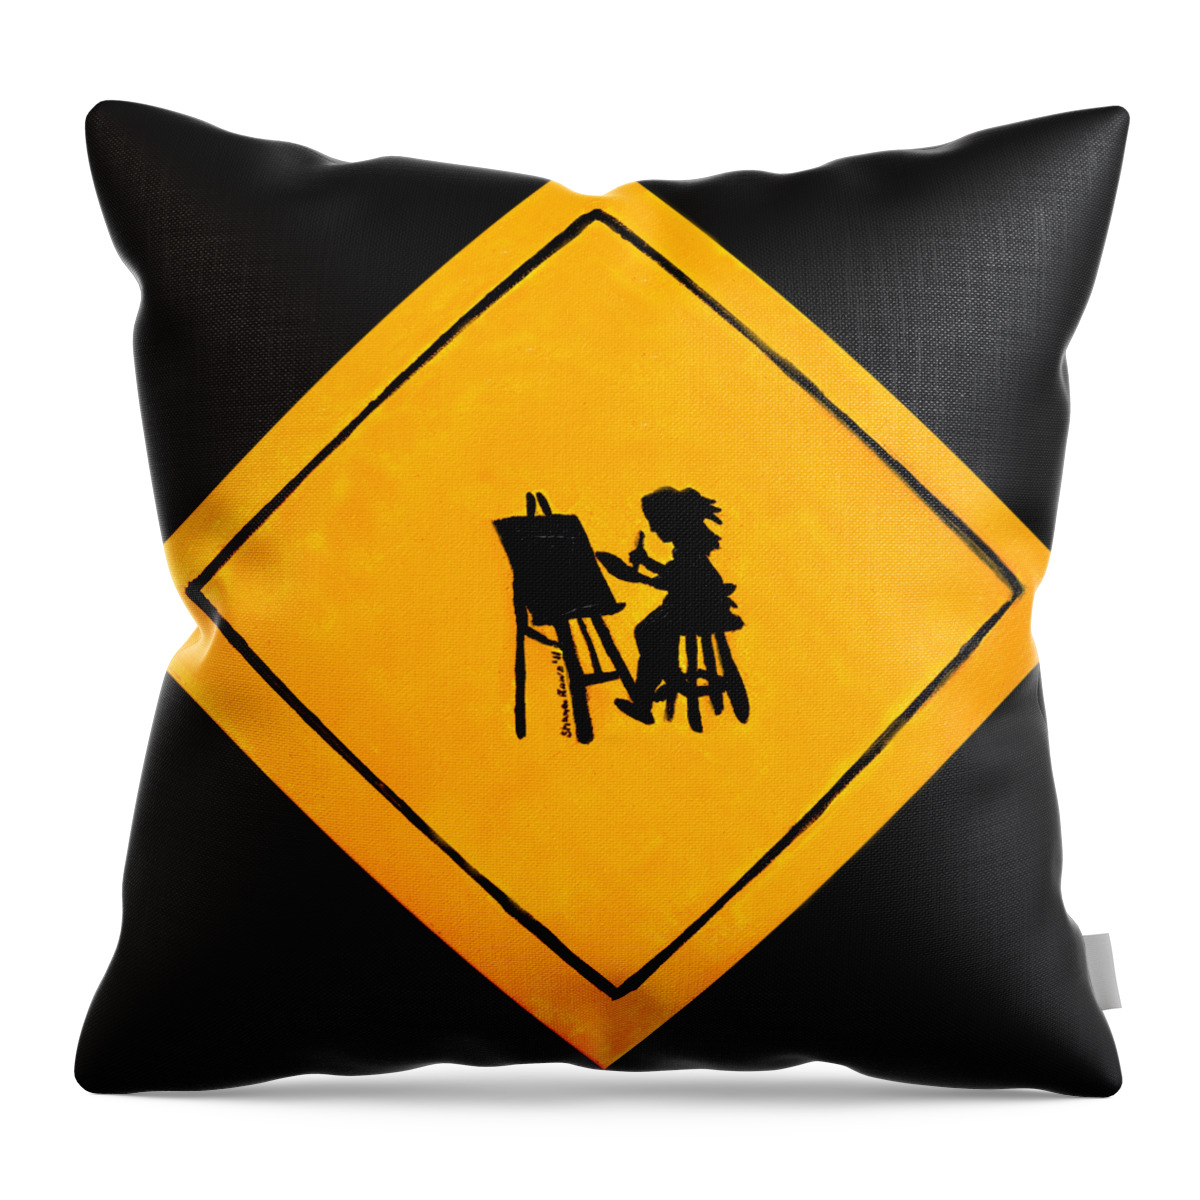 Artist Throw Pillow featuring the painting Caution Artist at Play by Shana Rowe Jackson